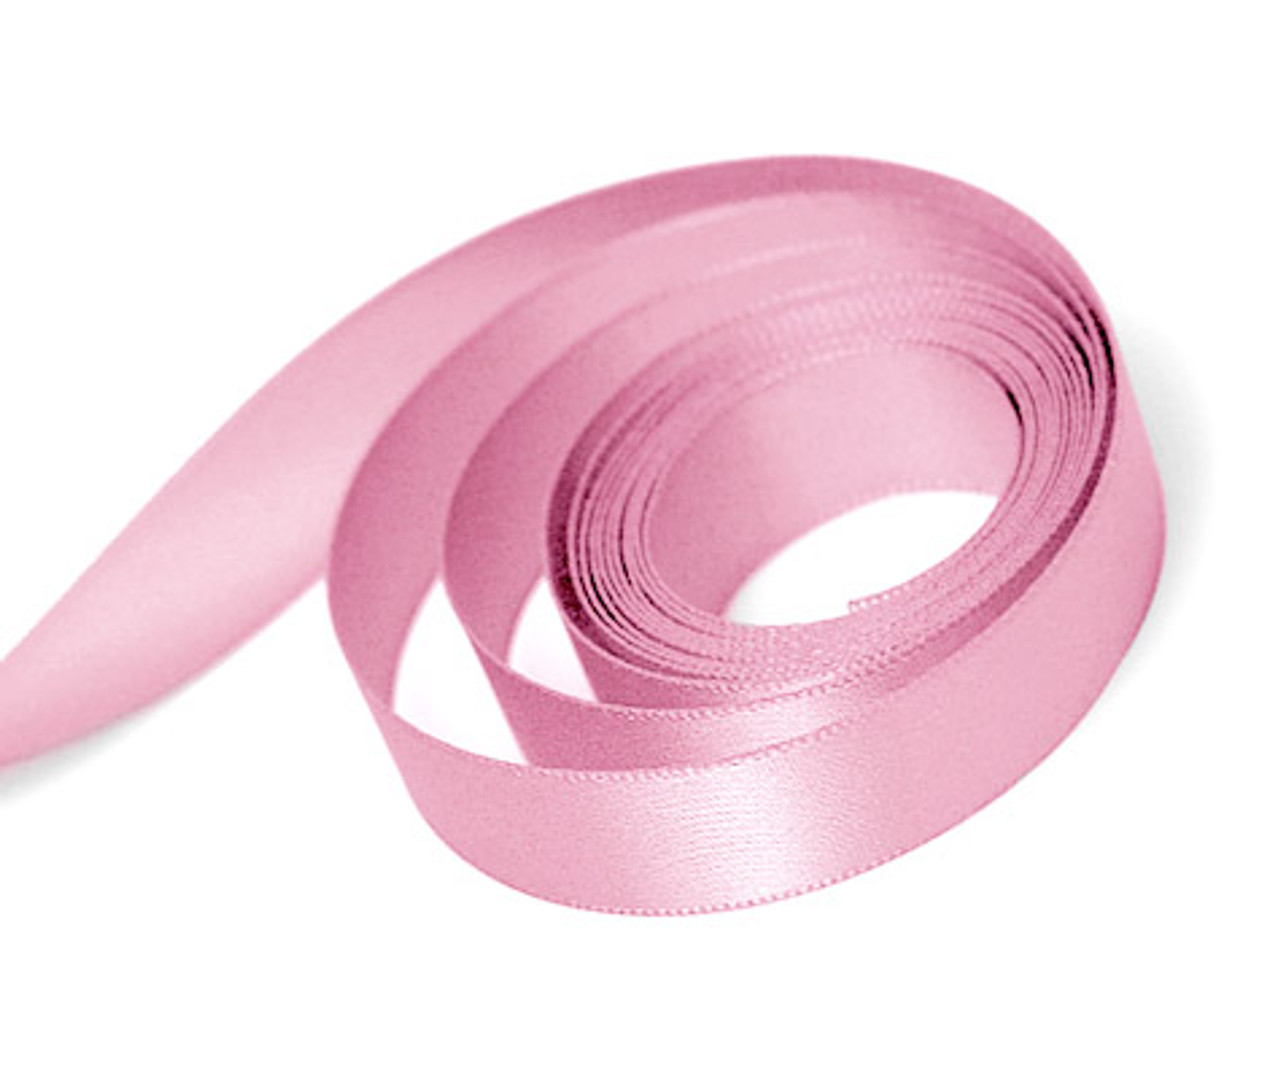 Pink Double Face Satin Ribbon 1-1/2" x 50 yards